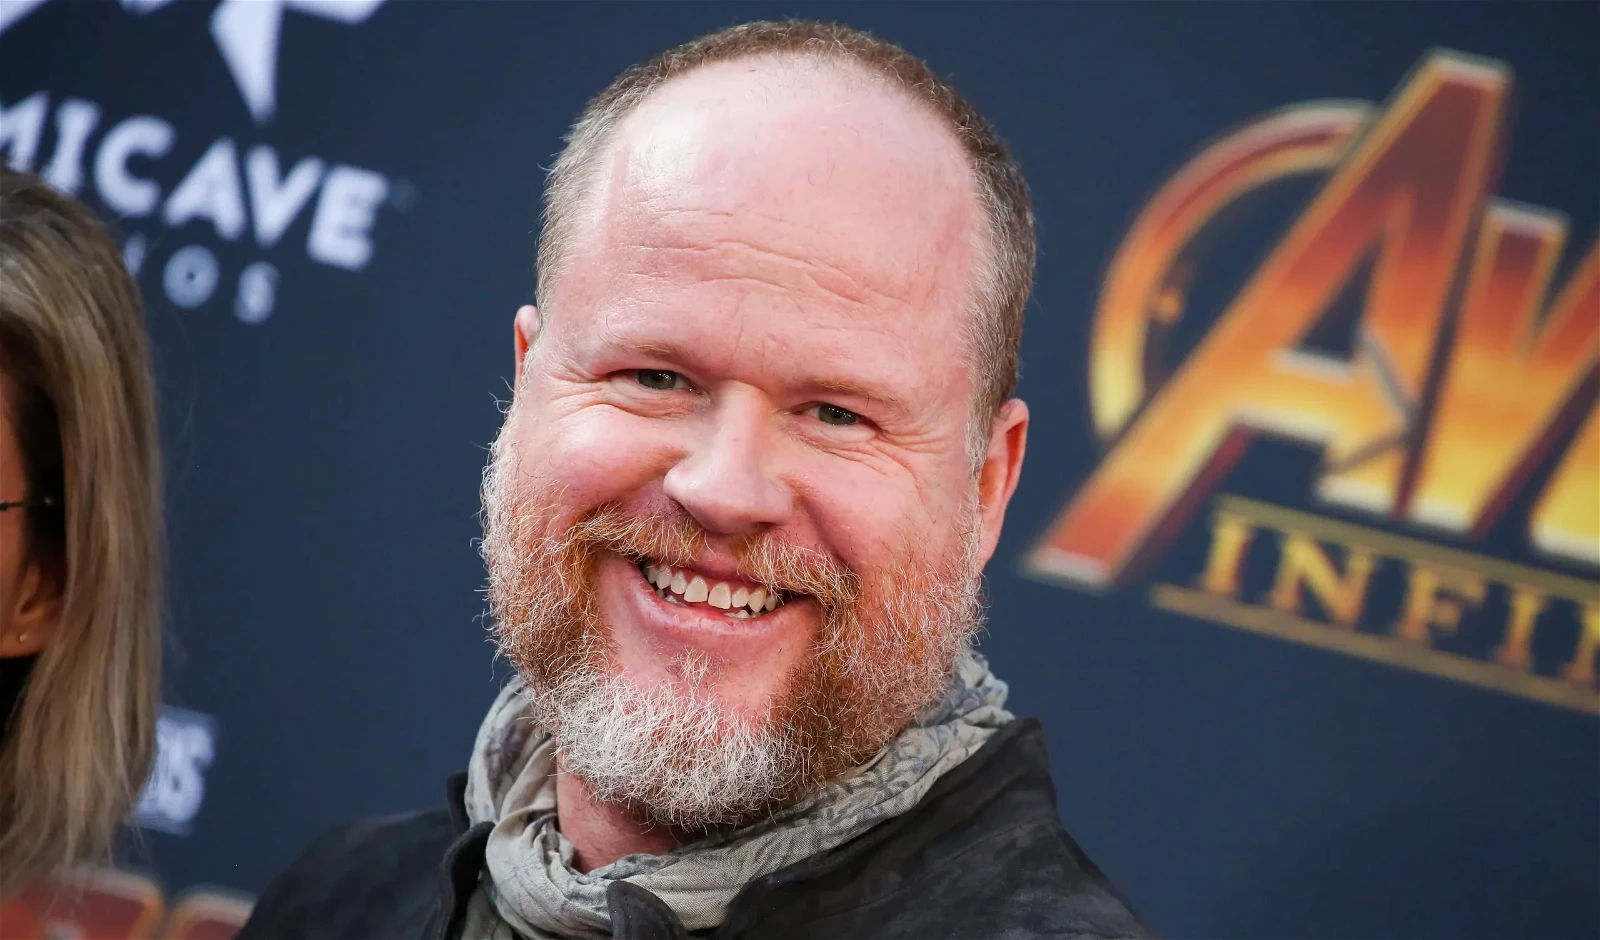 American filmmaker, composer, and comic book writer, Joss Whedon, who has worked with Nathan Fillion.